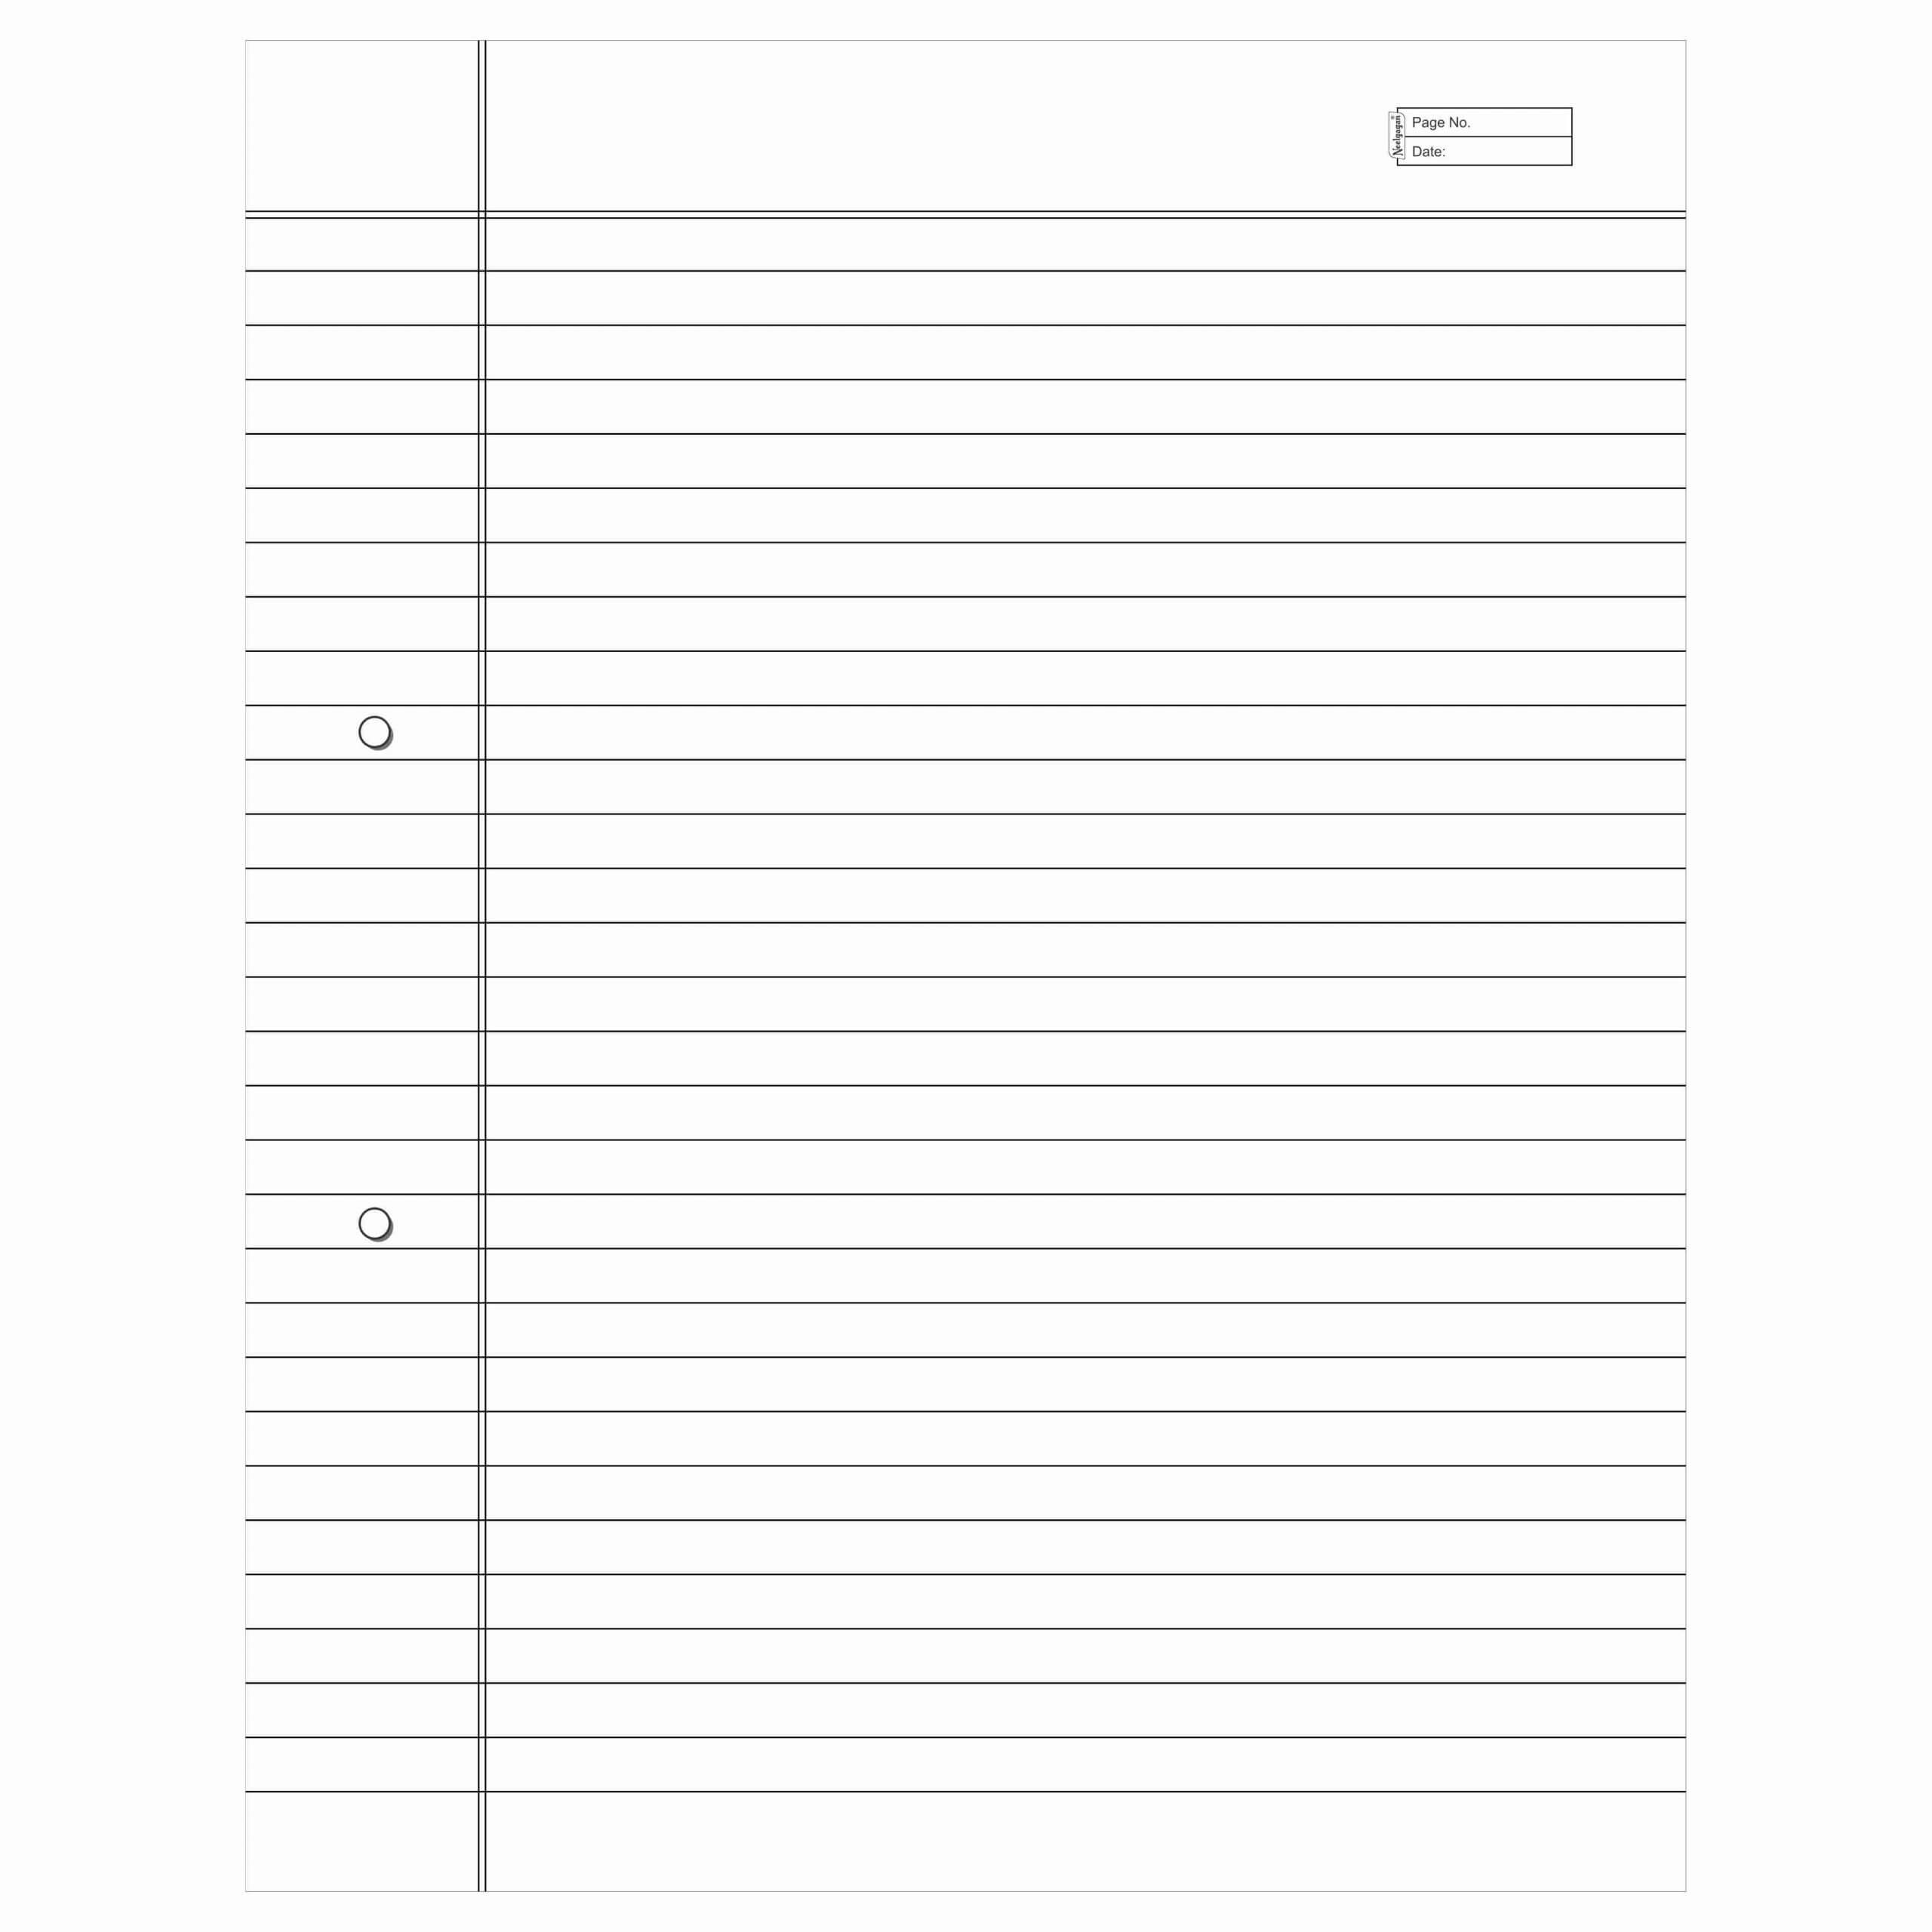 Chitrakar Drawing Sheet, (21.8cm x 26.8cm) Loose Center Punched (Suitable for Drawing & Sketching)